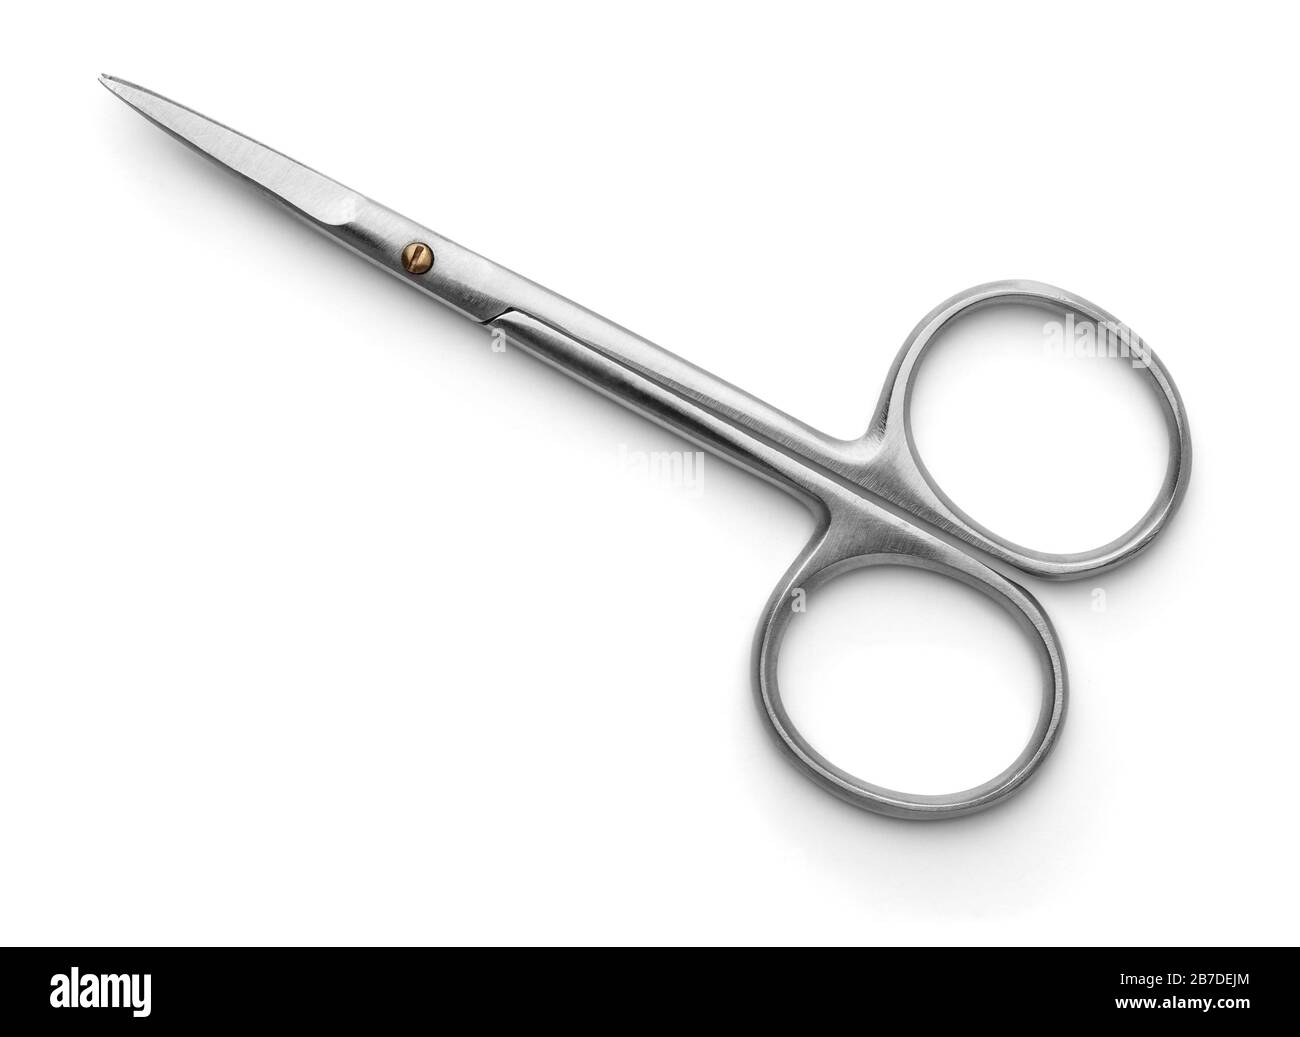 Top view of stainless steel manicure scissors isolated on white Stock Photo